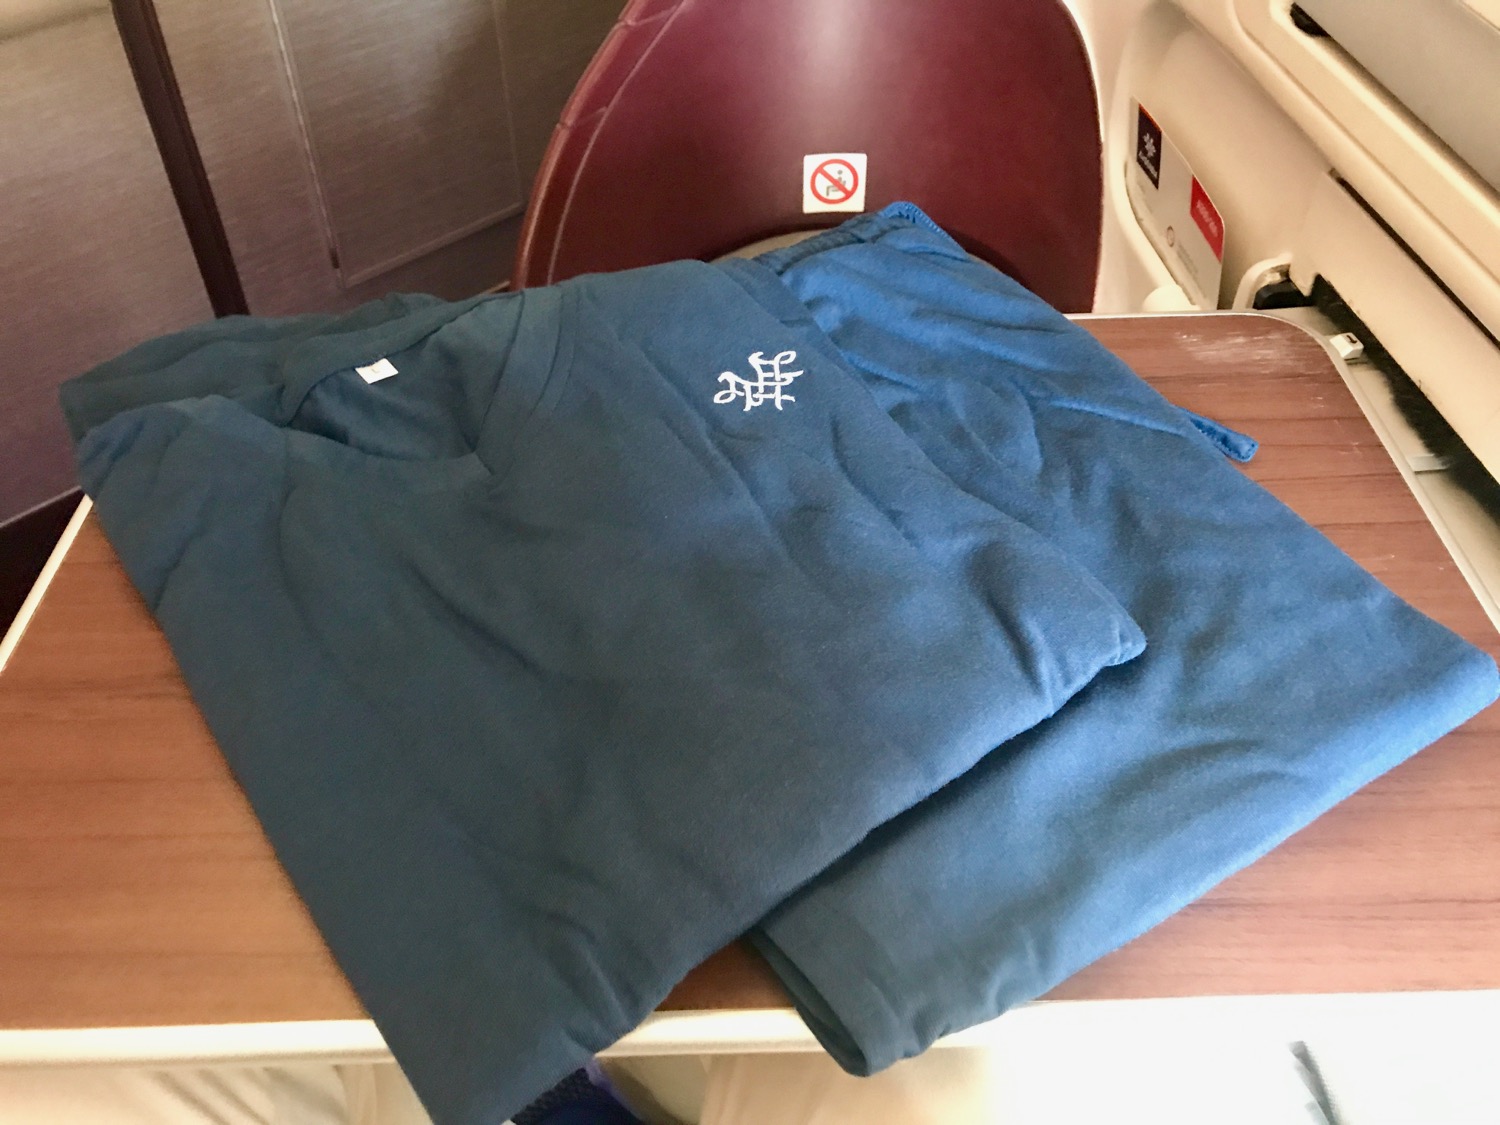 a blue shirt and pants on a table